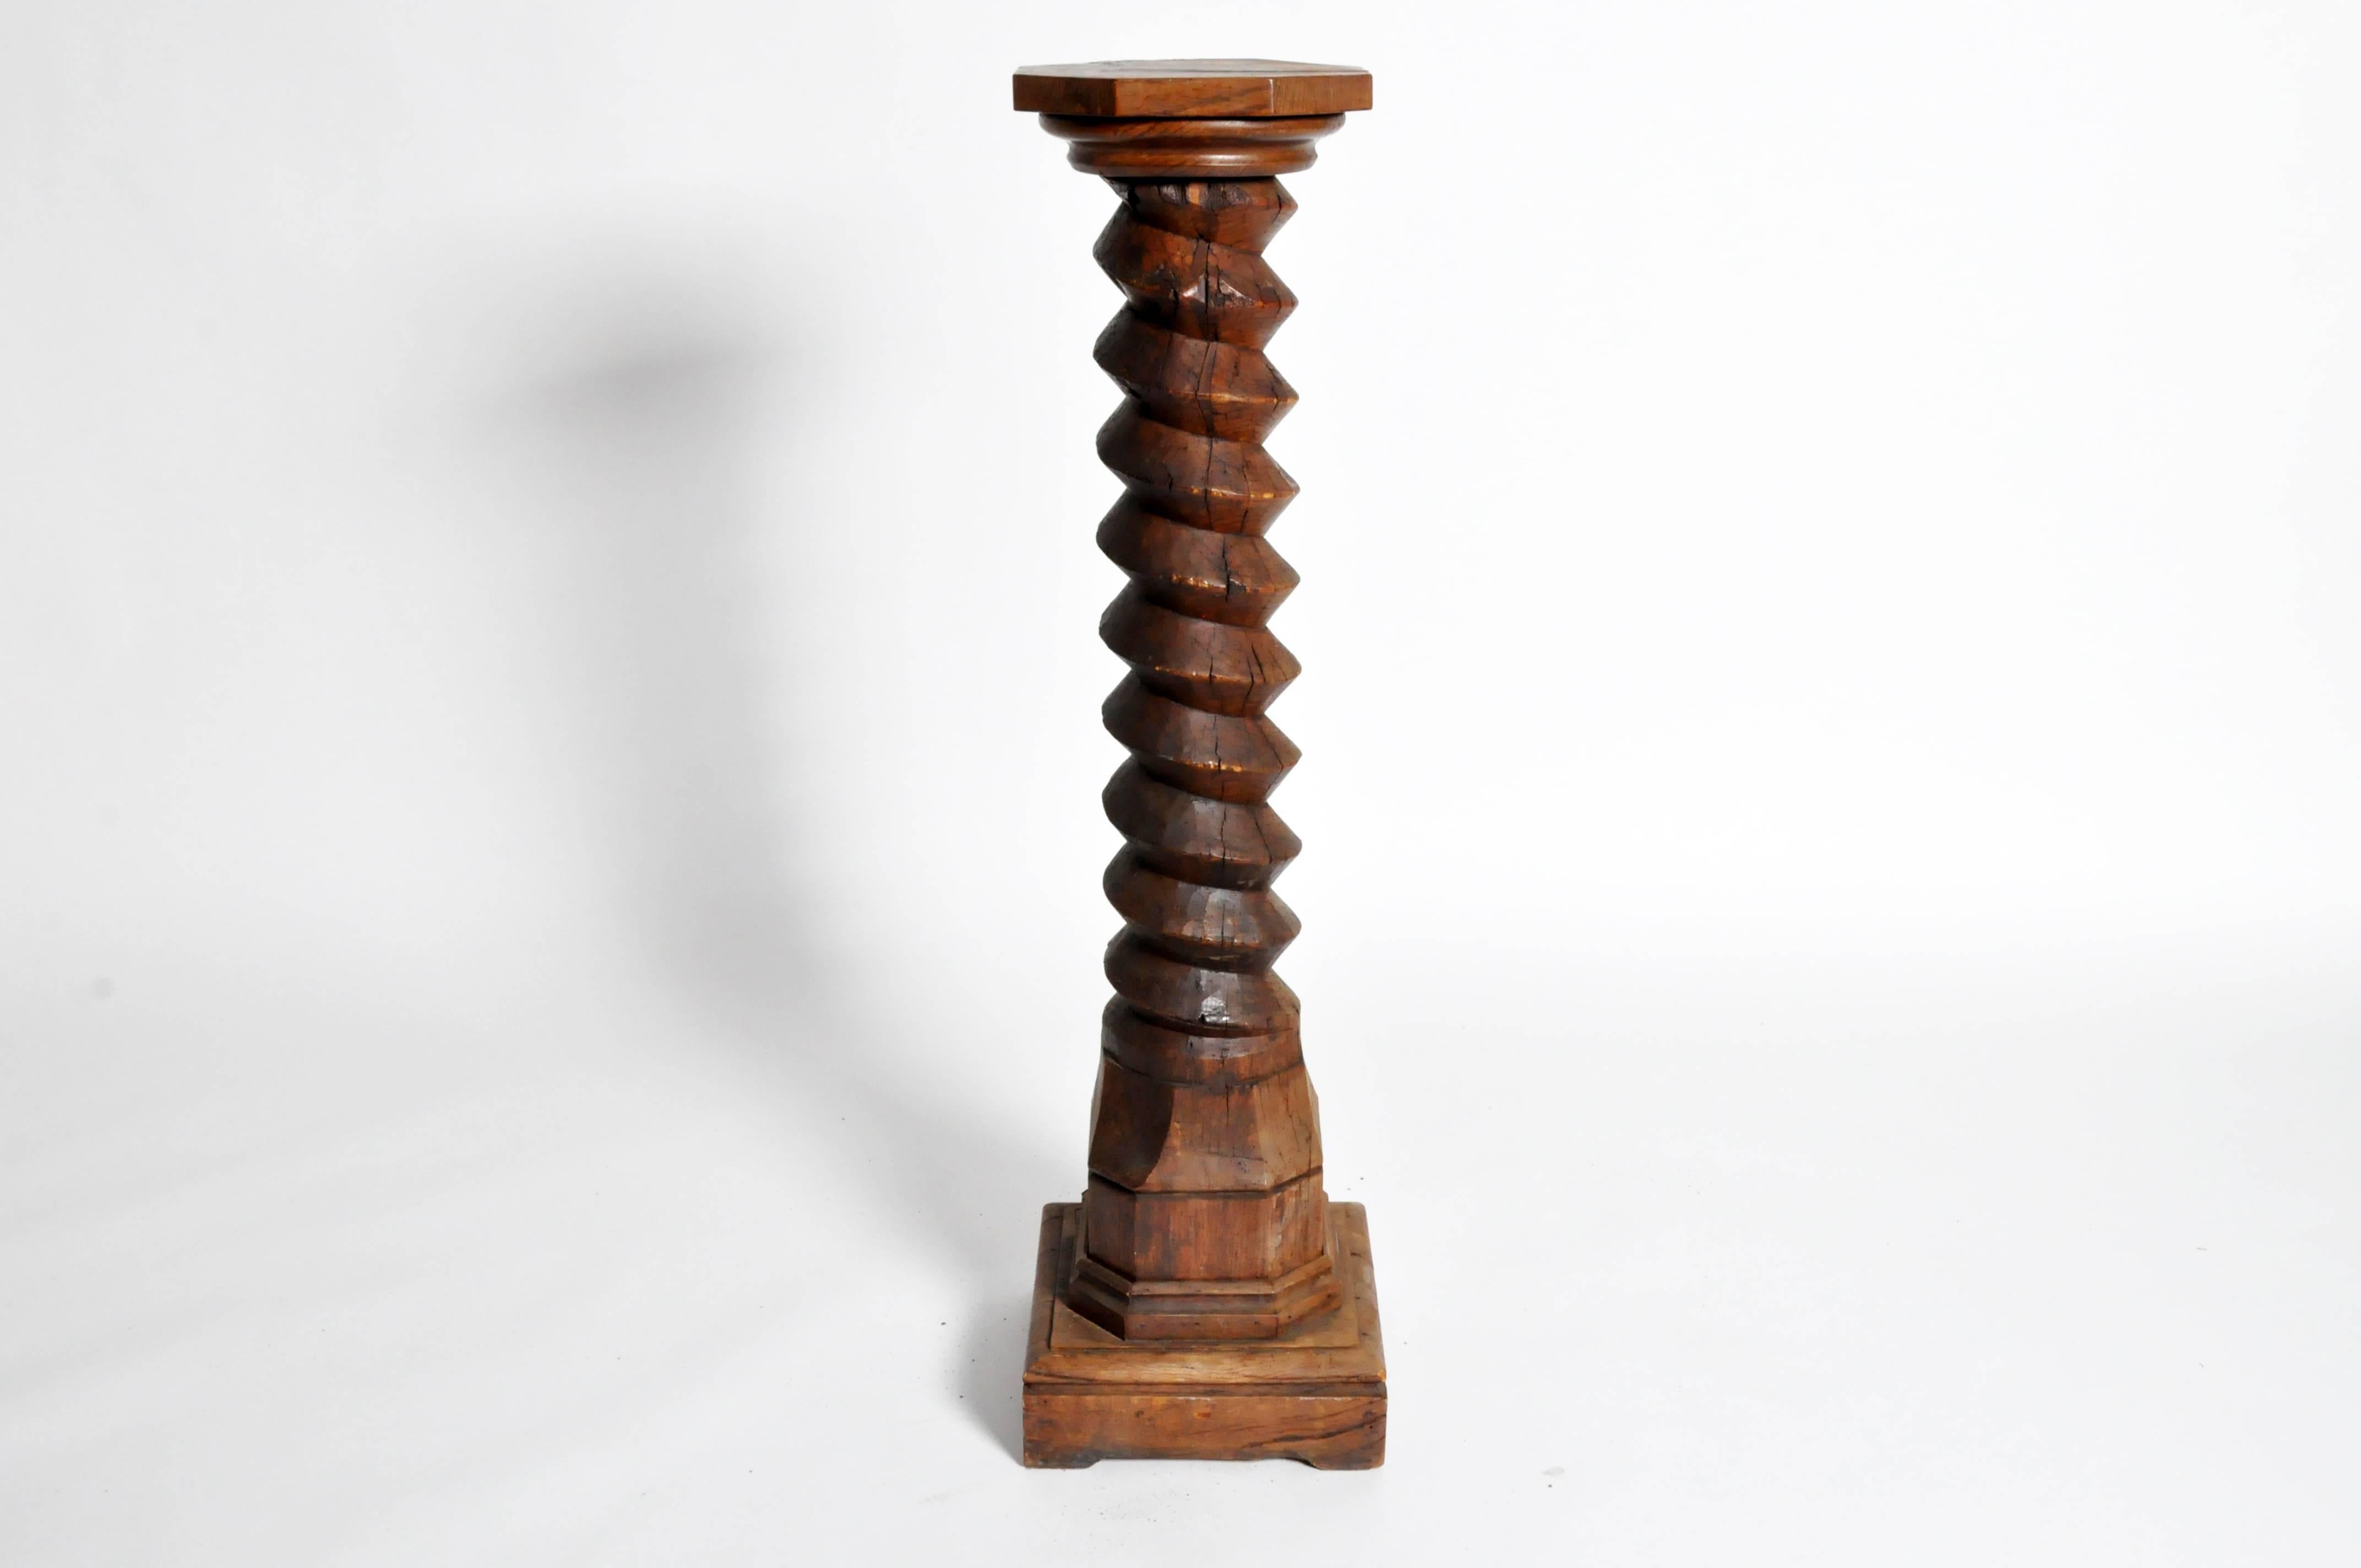 This wine press screw is from France and is made from walnut wood, circa 1870. The piece can be used as a pedestal as well for display.